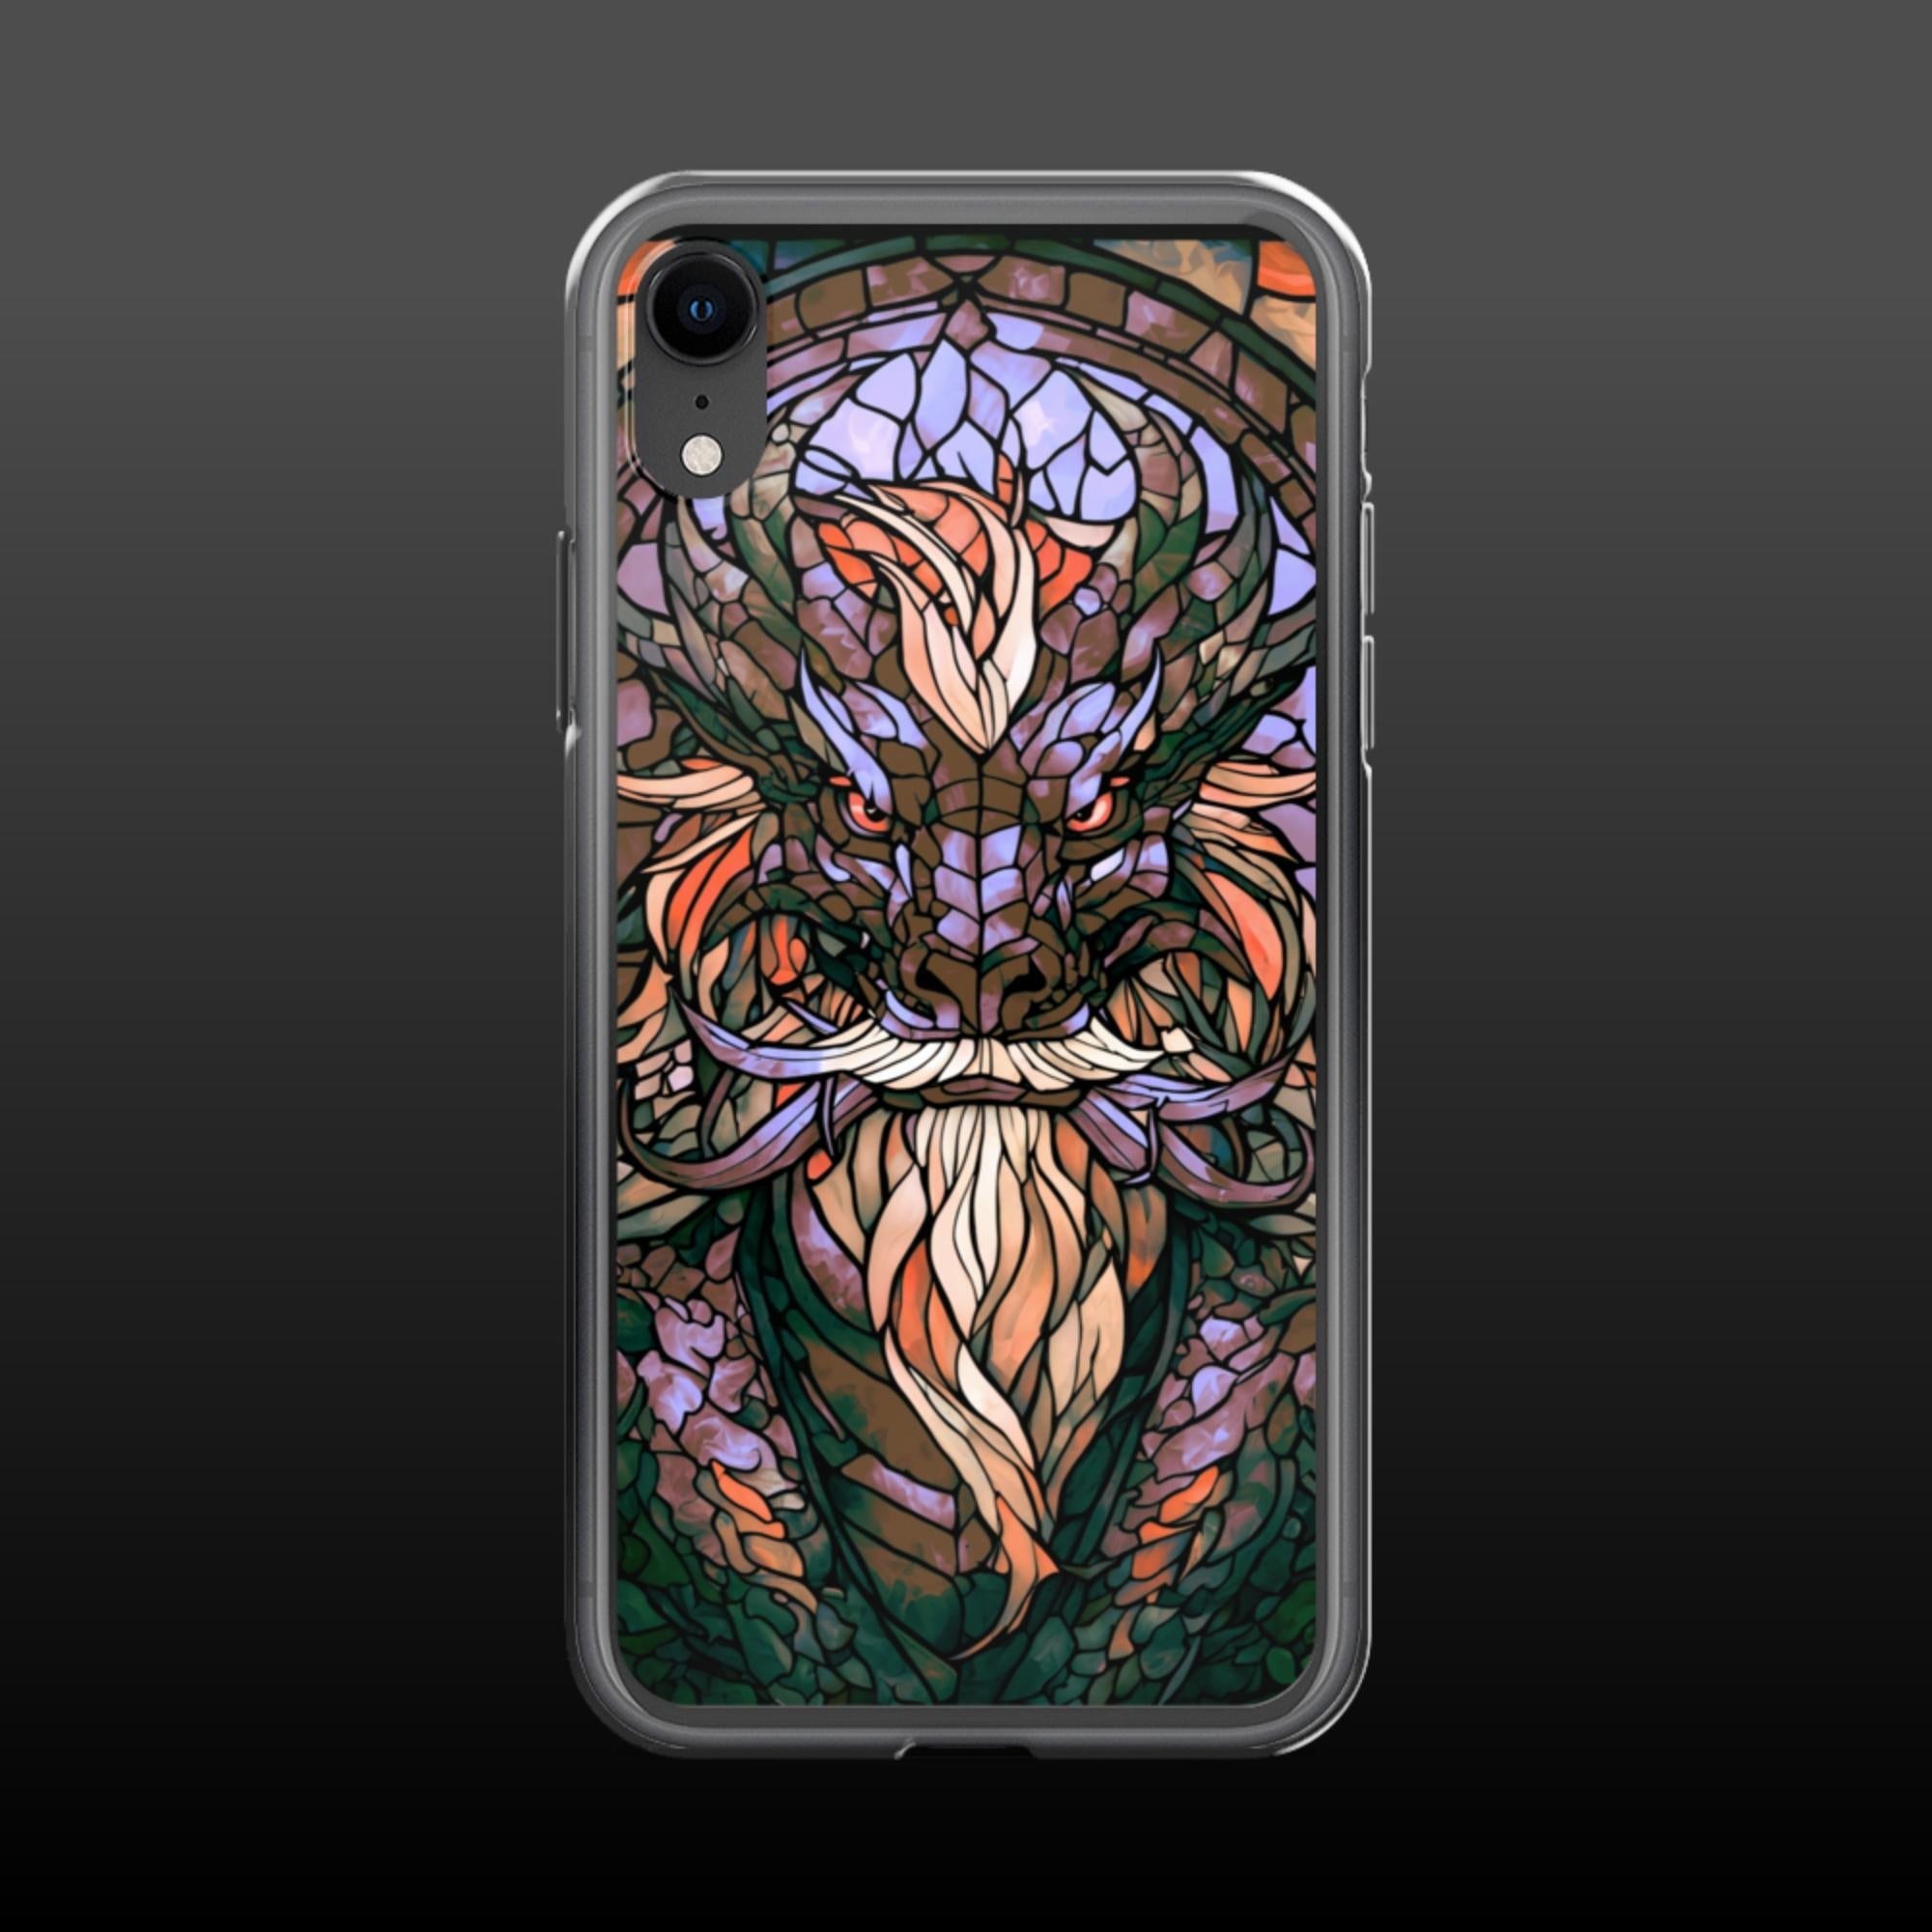 "Elder tyrant" clear iphone case - Clear iphone case - Ever colorful